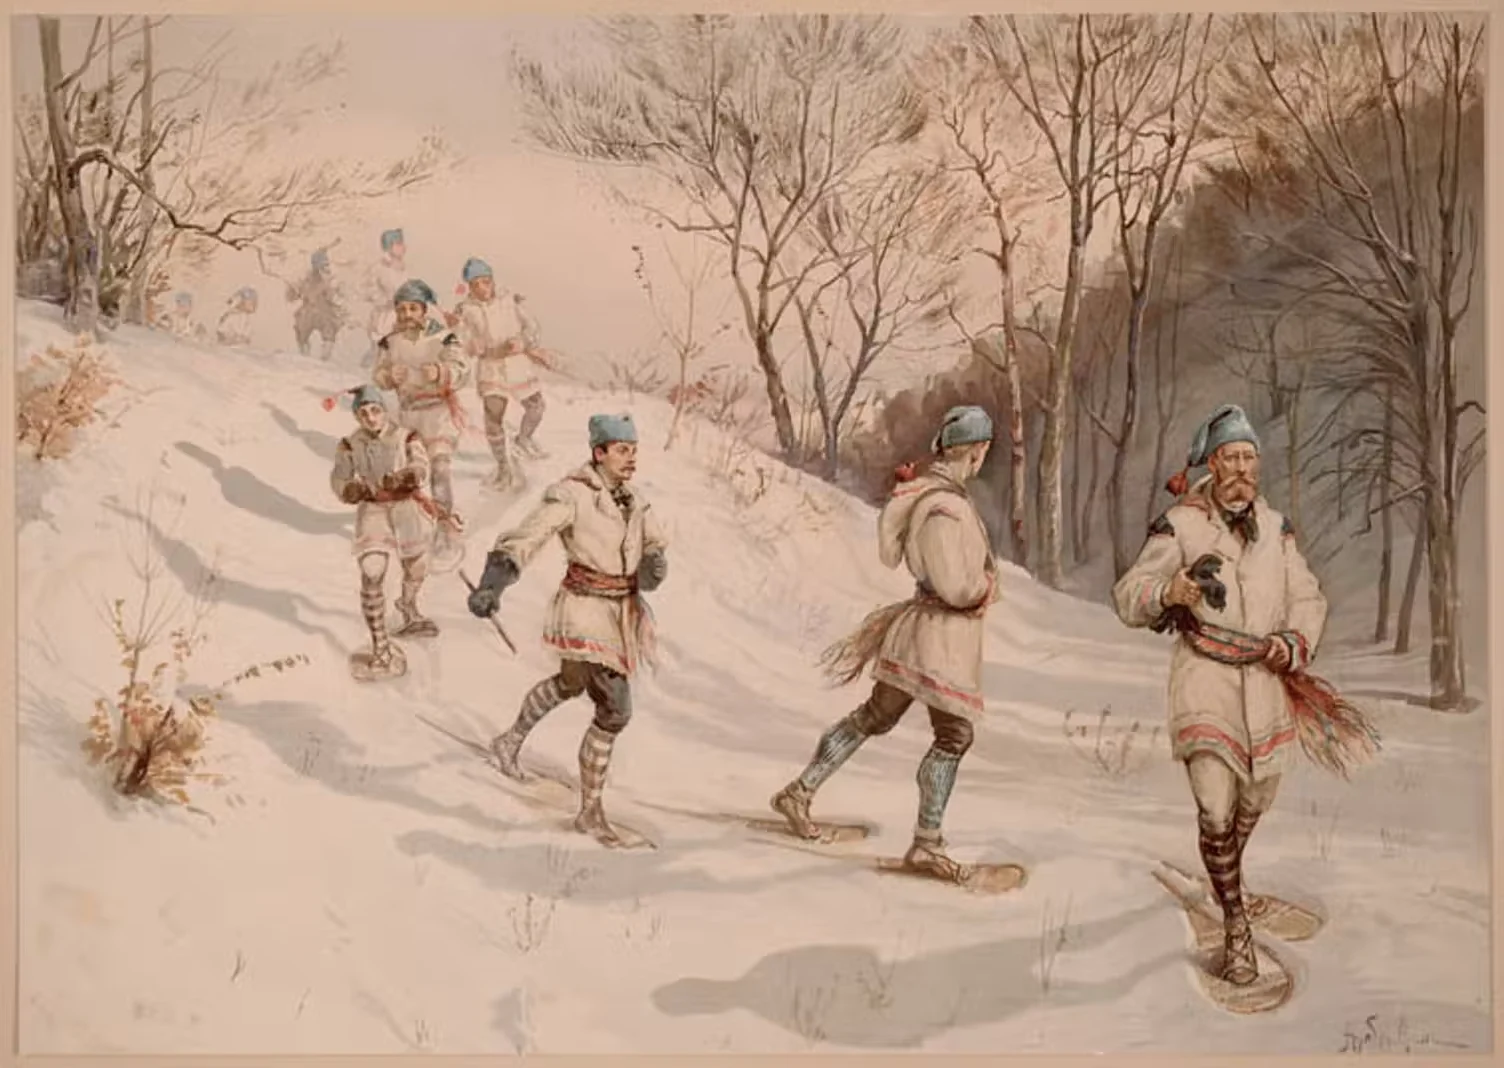 Lithograph on wove paper of ‘Snowshoeing Club of Montréal.’ Several men are depicted walking in the snowy woods with snowshoes. Henry Sandham (1842-1910)/Library and Archives Canada, Acc. No. R9266-1432, CC BY-NC